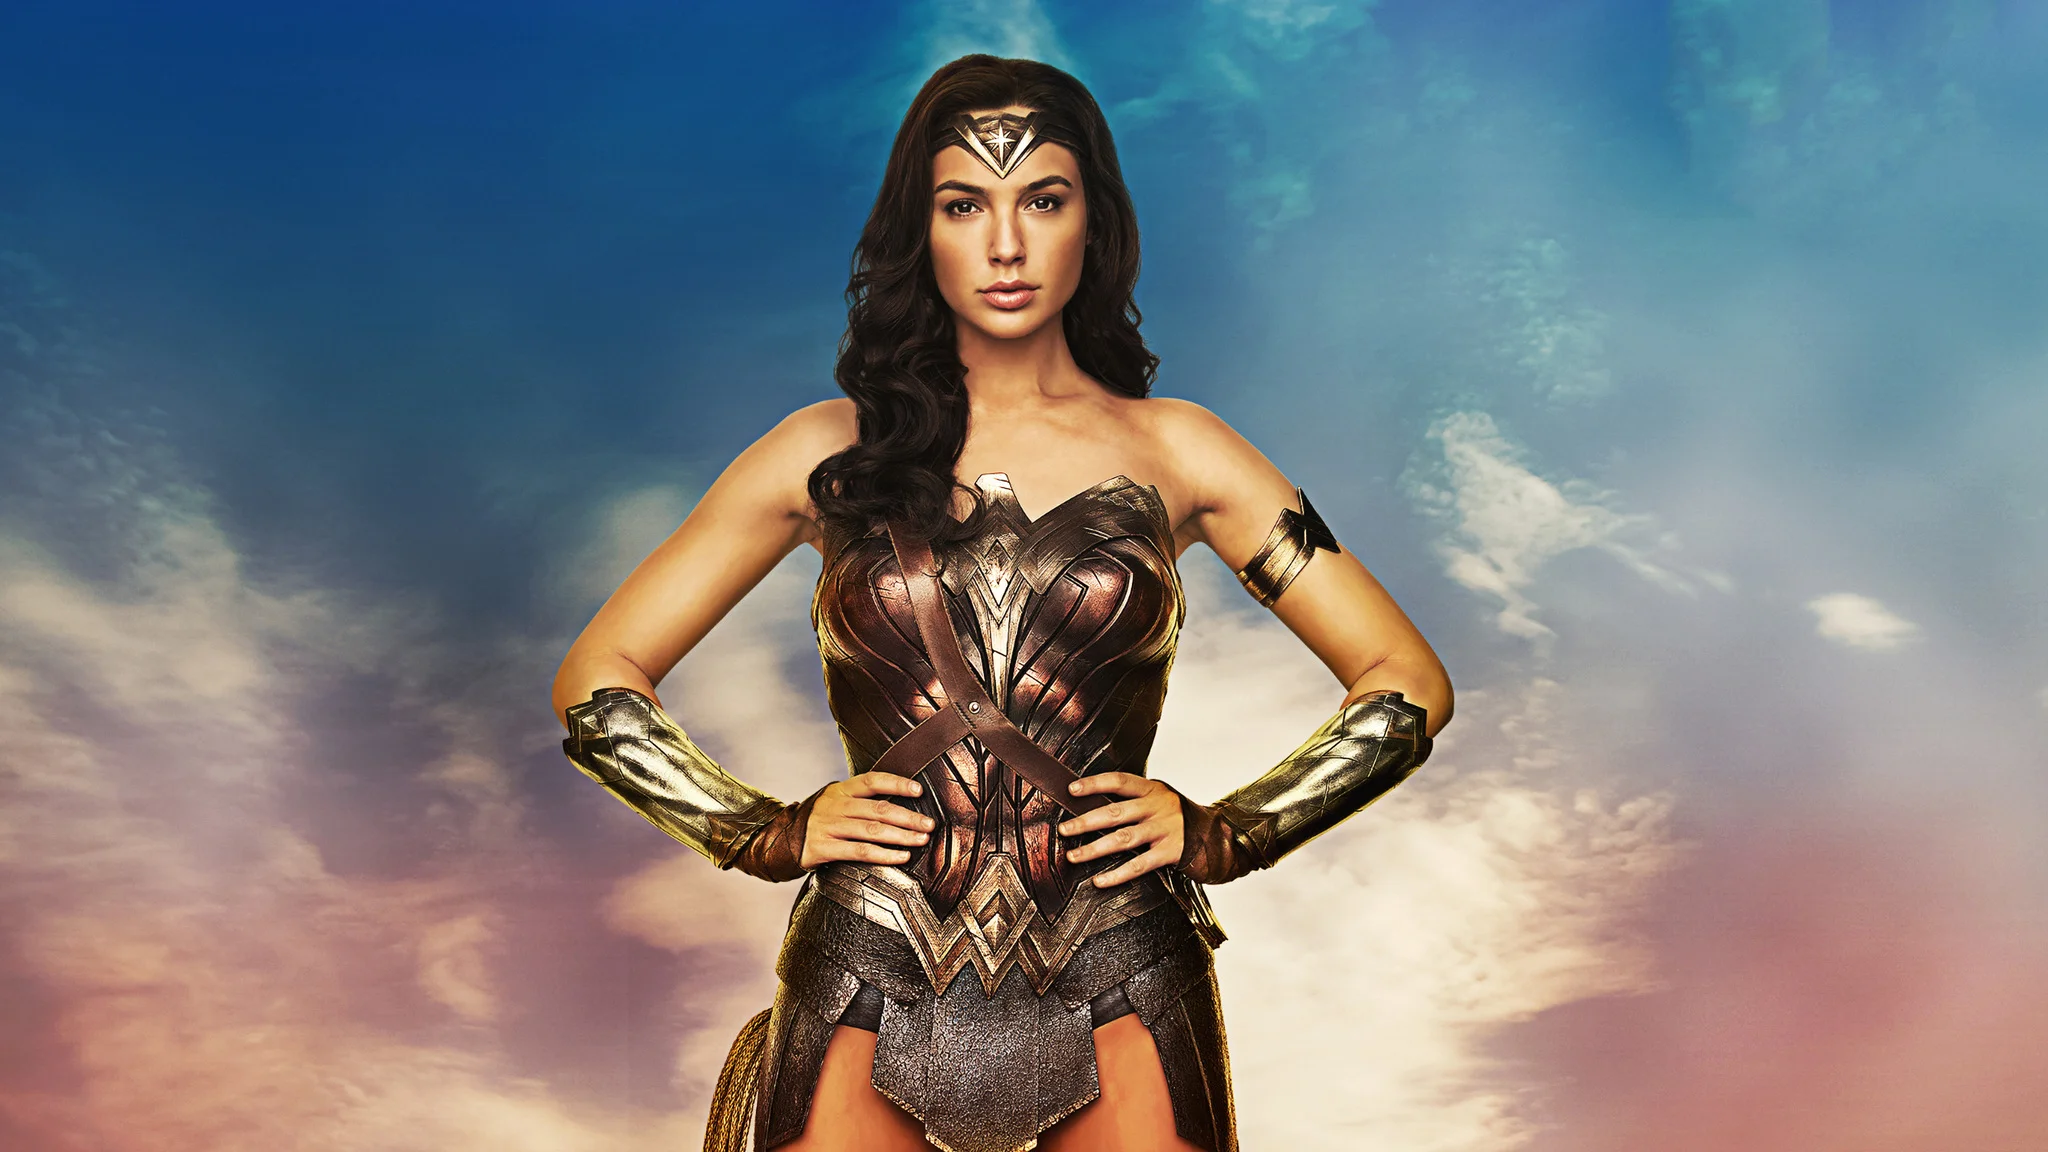 The neural network showed Wonder Woman performed by Gal Gadot in a new costume